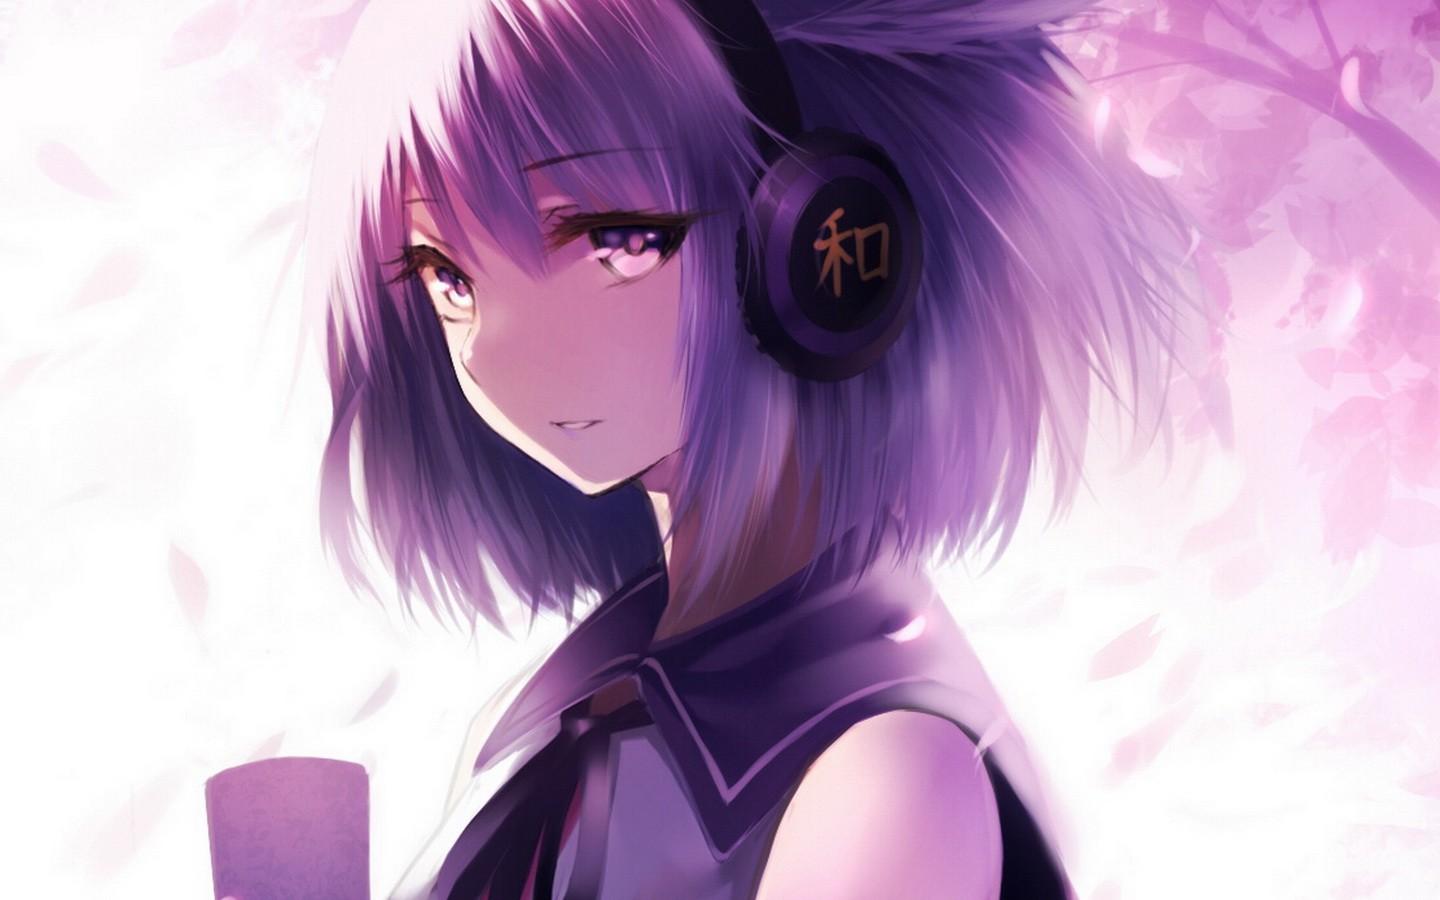 Purple Anime Hd Wallpapers Wallpaper Cave